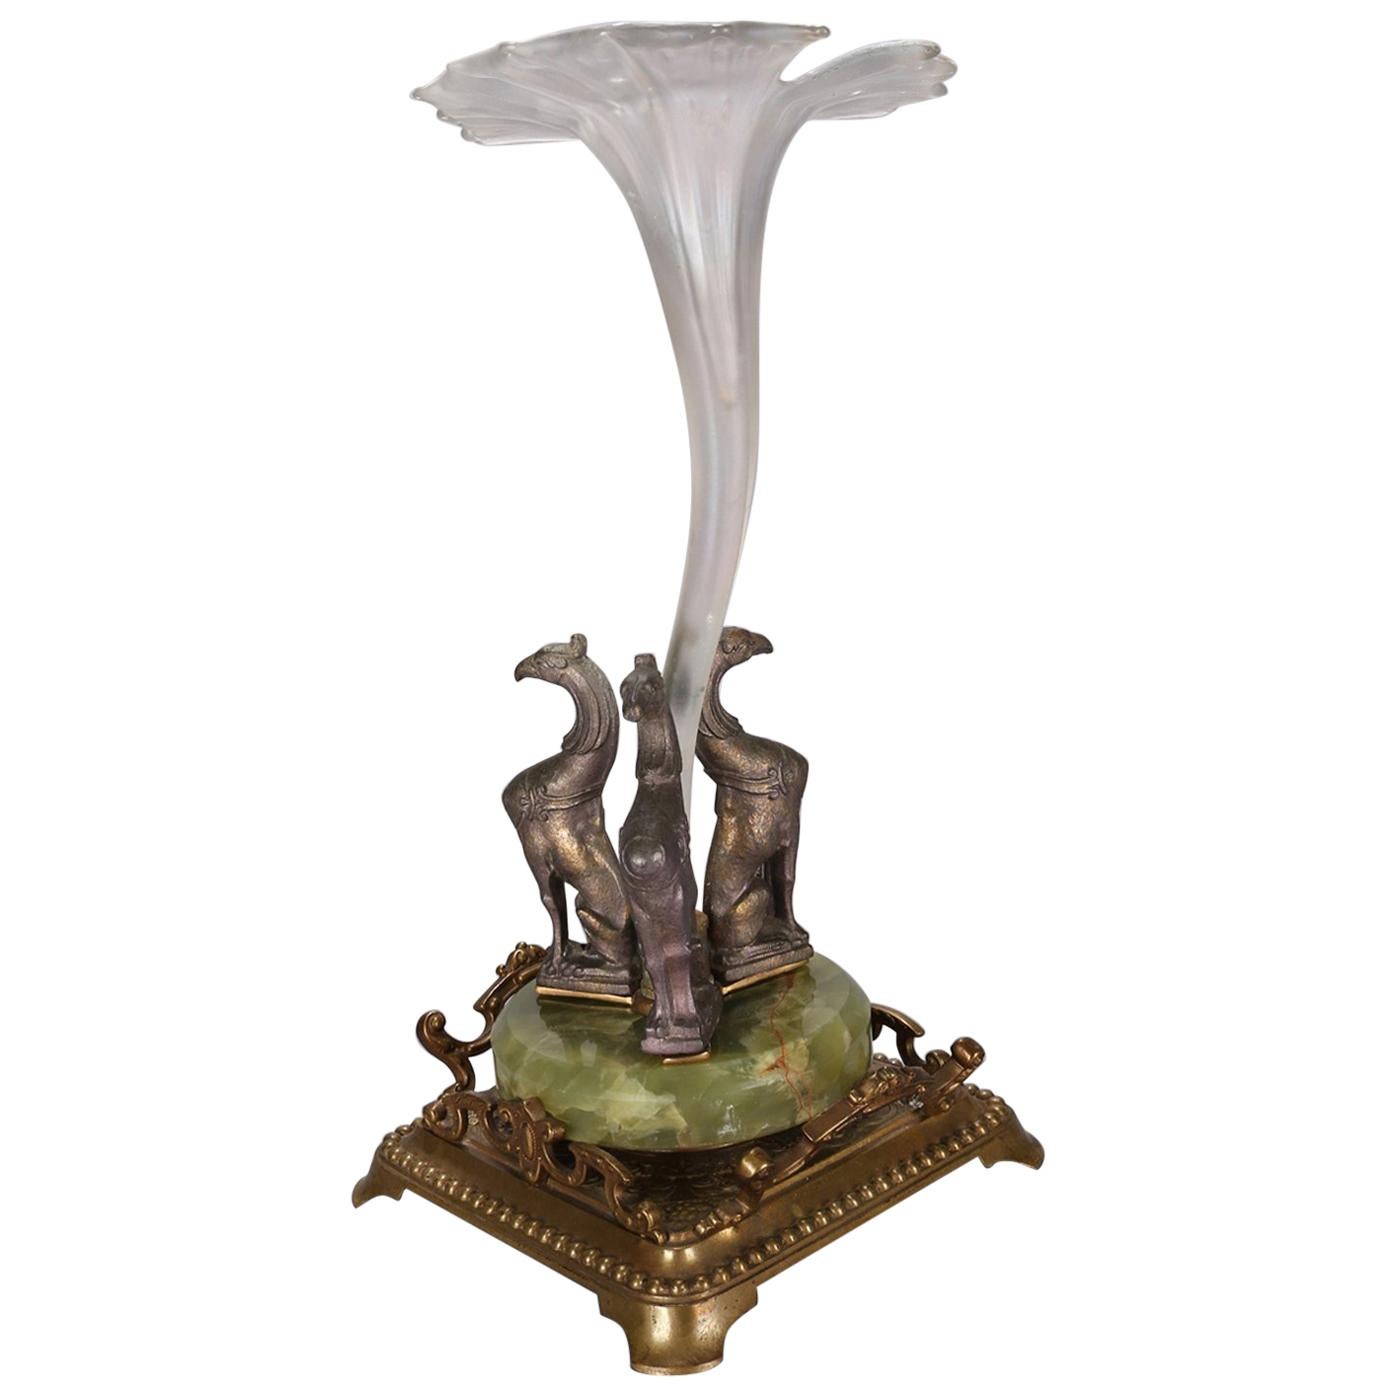 Figural French Gilt Metal Onyx and Art Glass Tulip Gryphon Orchid Epergne